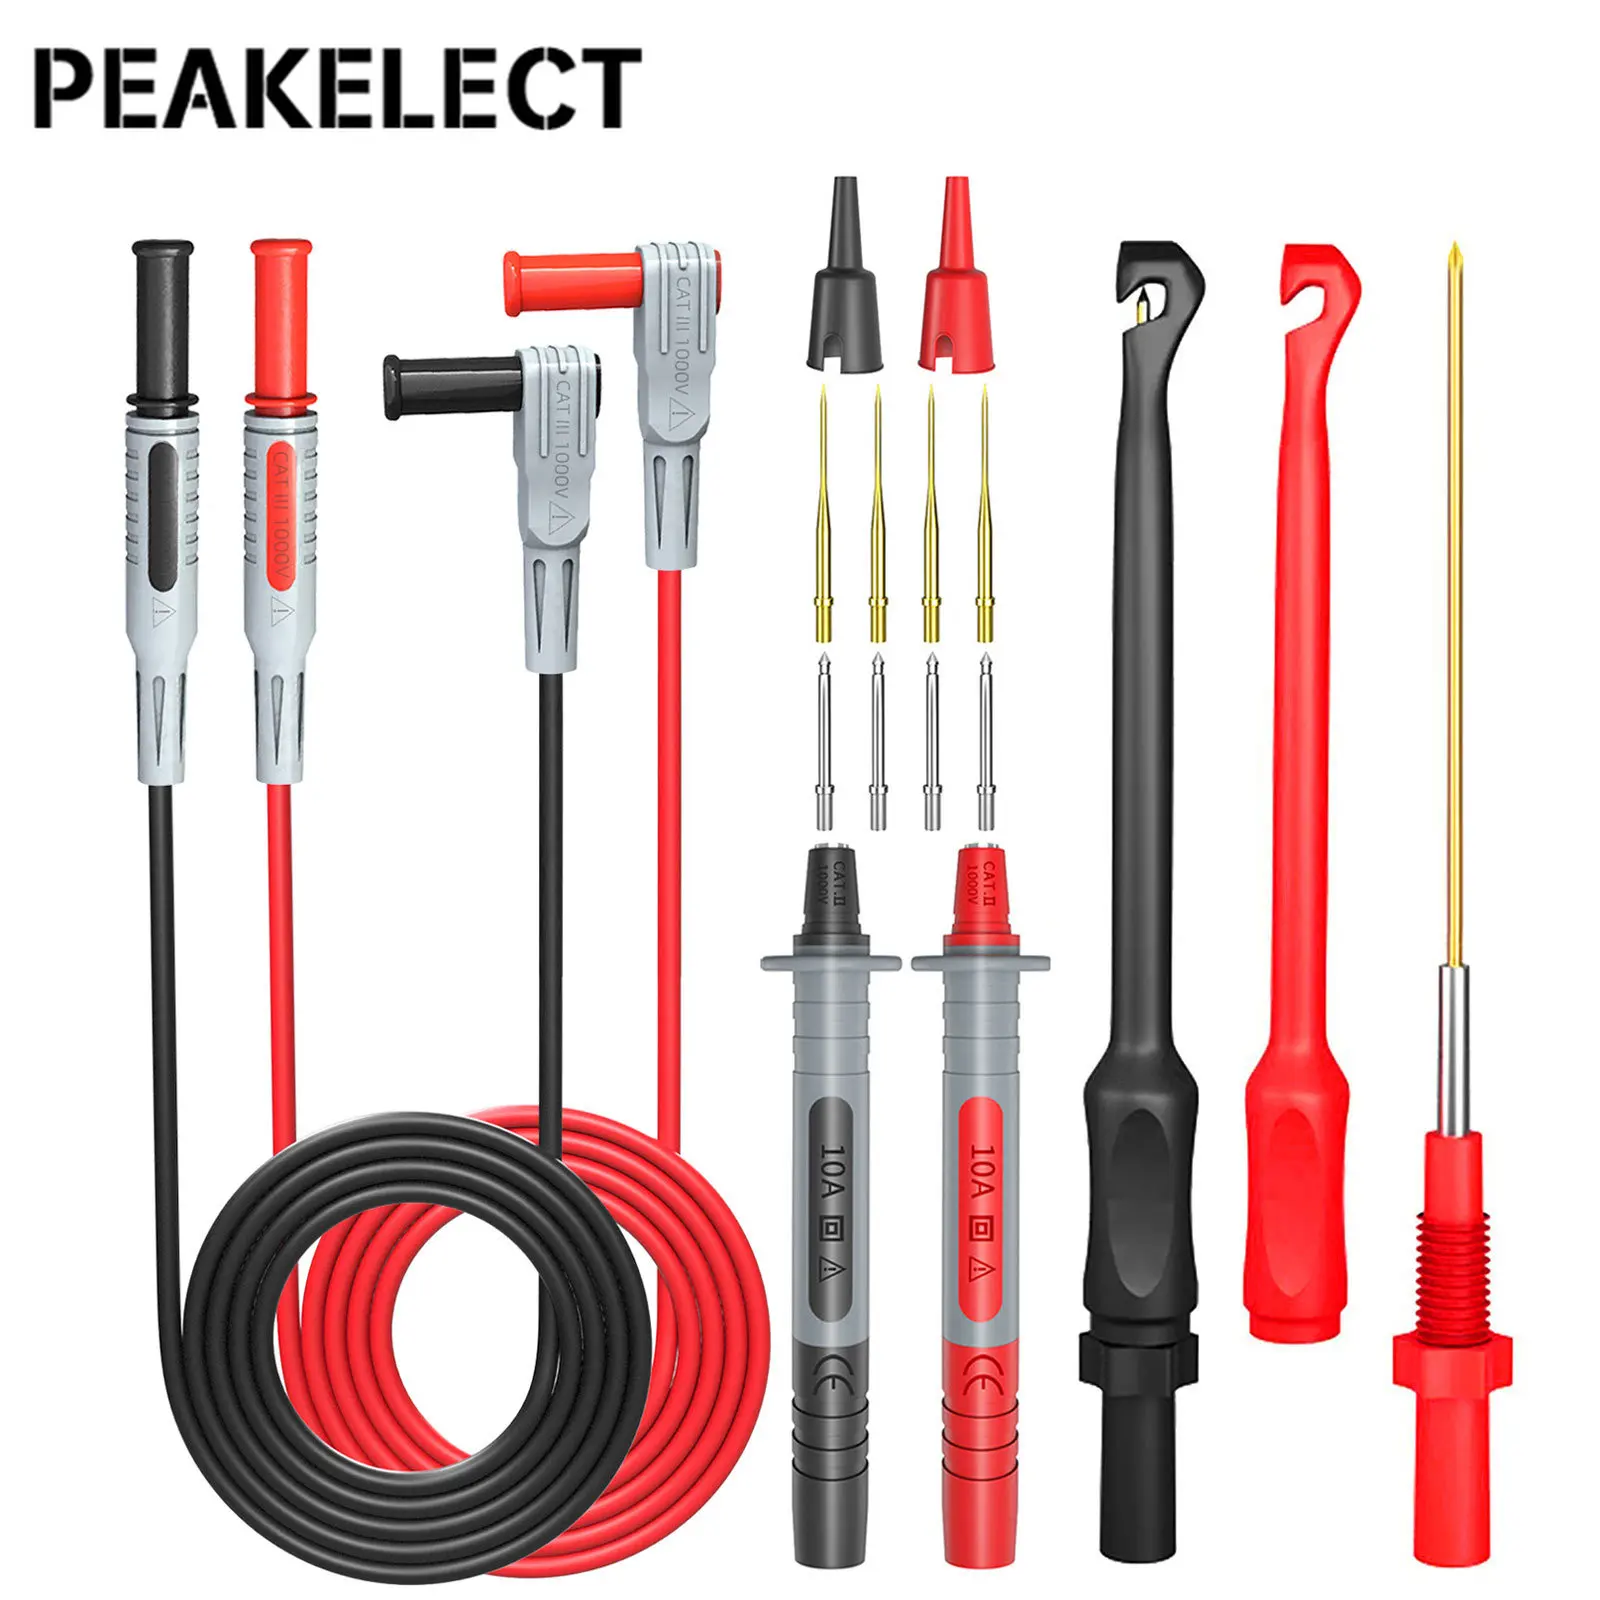 Peakelect P1033B Multimeter Test Probes Leads Kit with Wire Piercing Puncture 4mm Banana Plug Test Leads Test Probes 10pcs multimeter test probe set 0 7mm professional clamp copper probes plug measuring instrument electrician tool